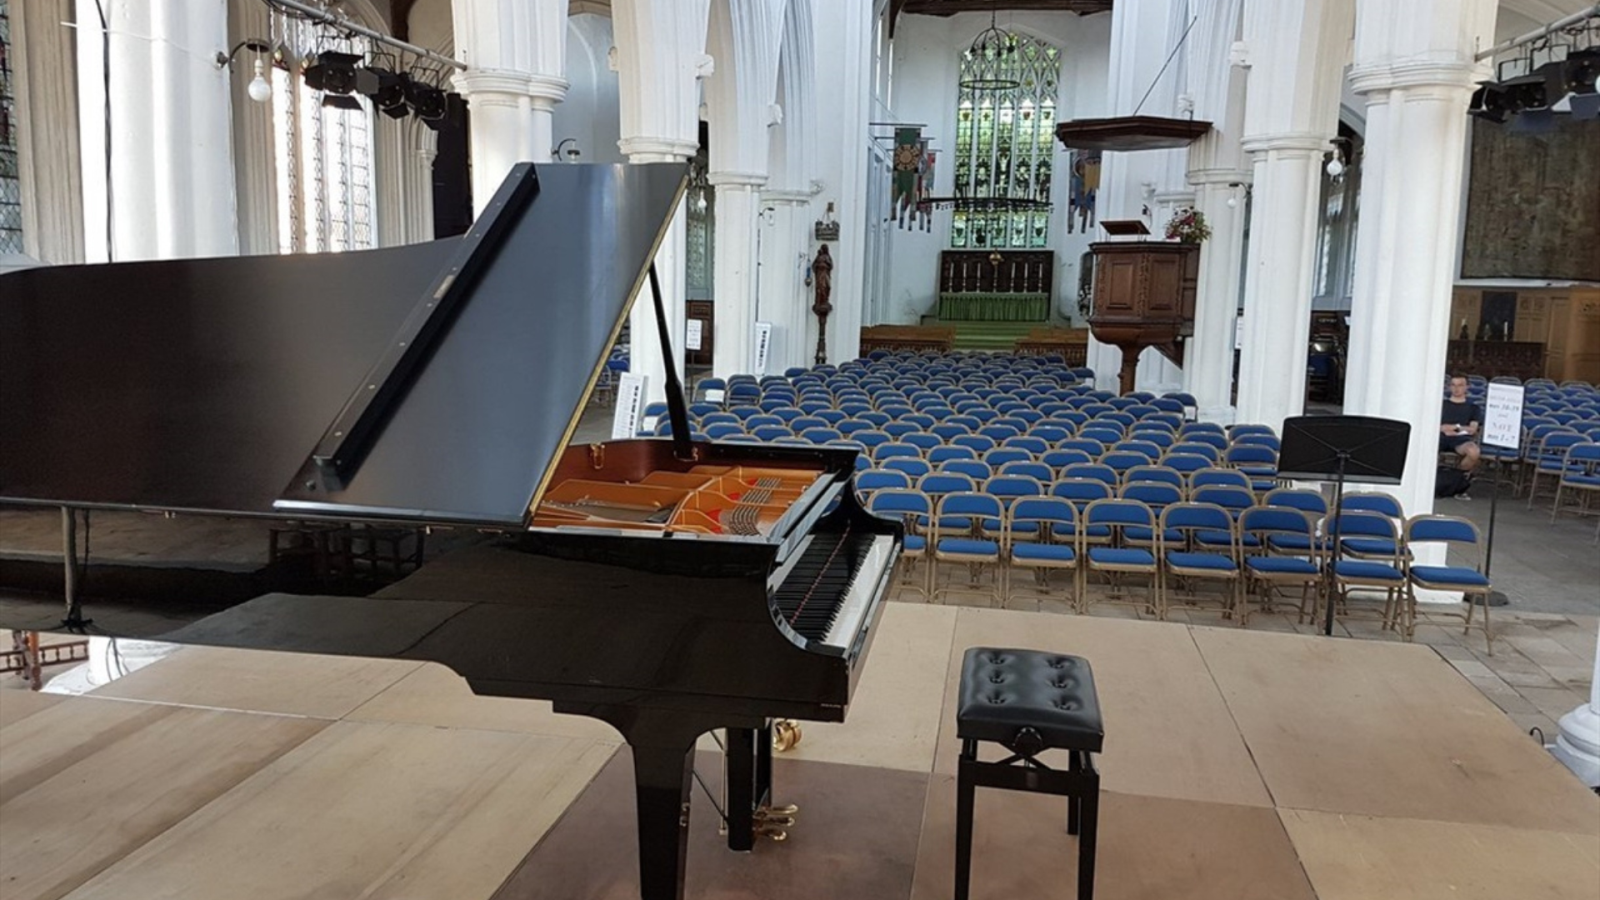 Piano Thaxted Festival